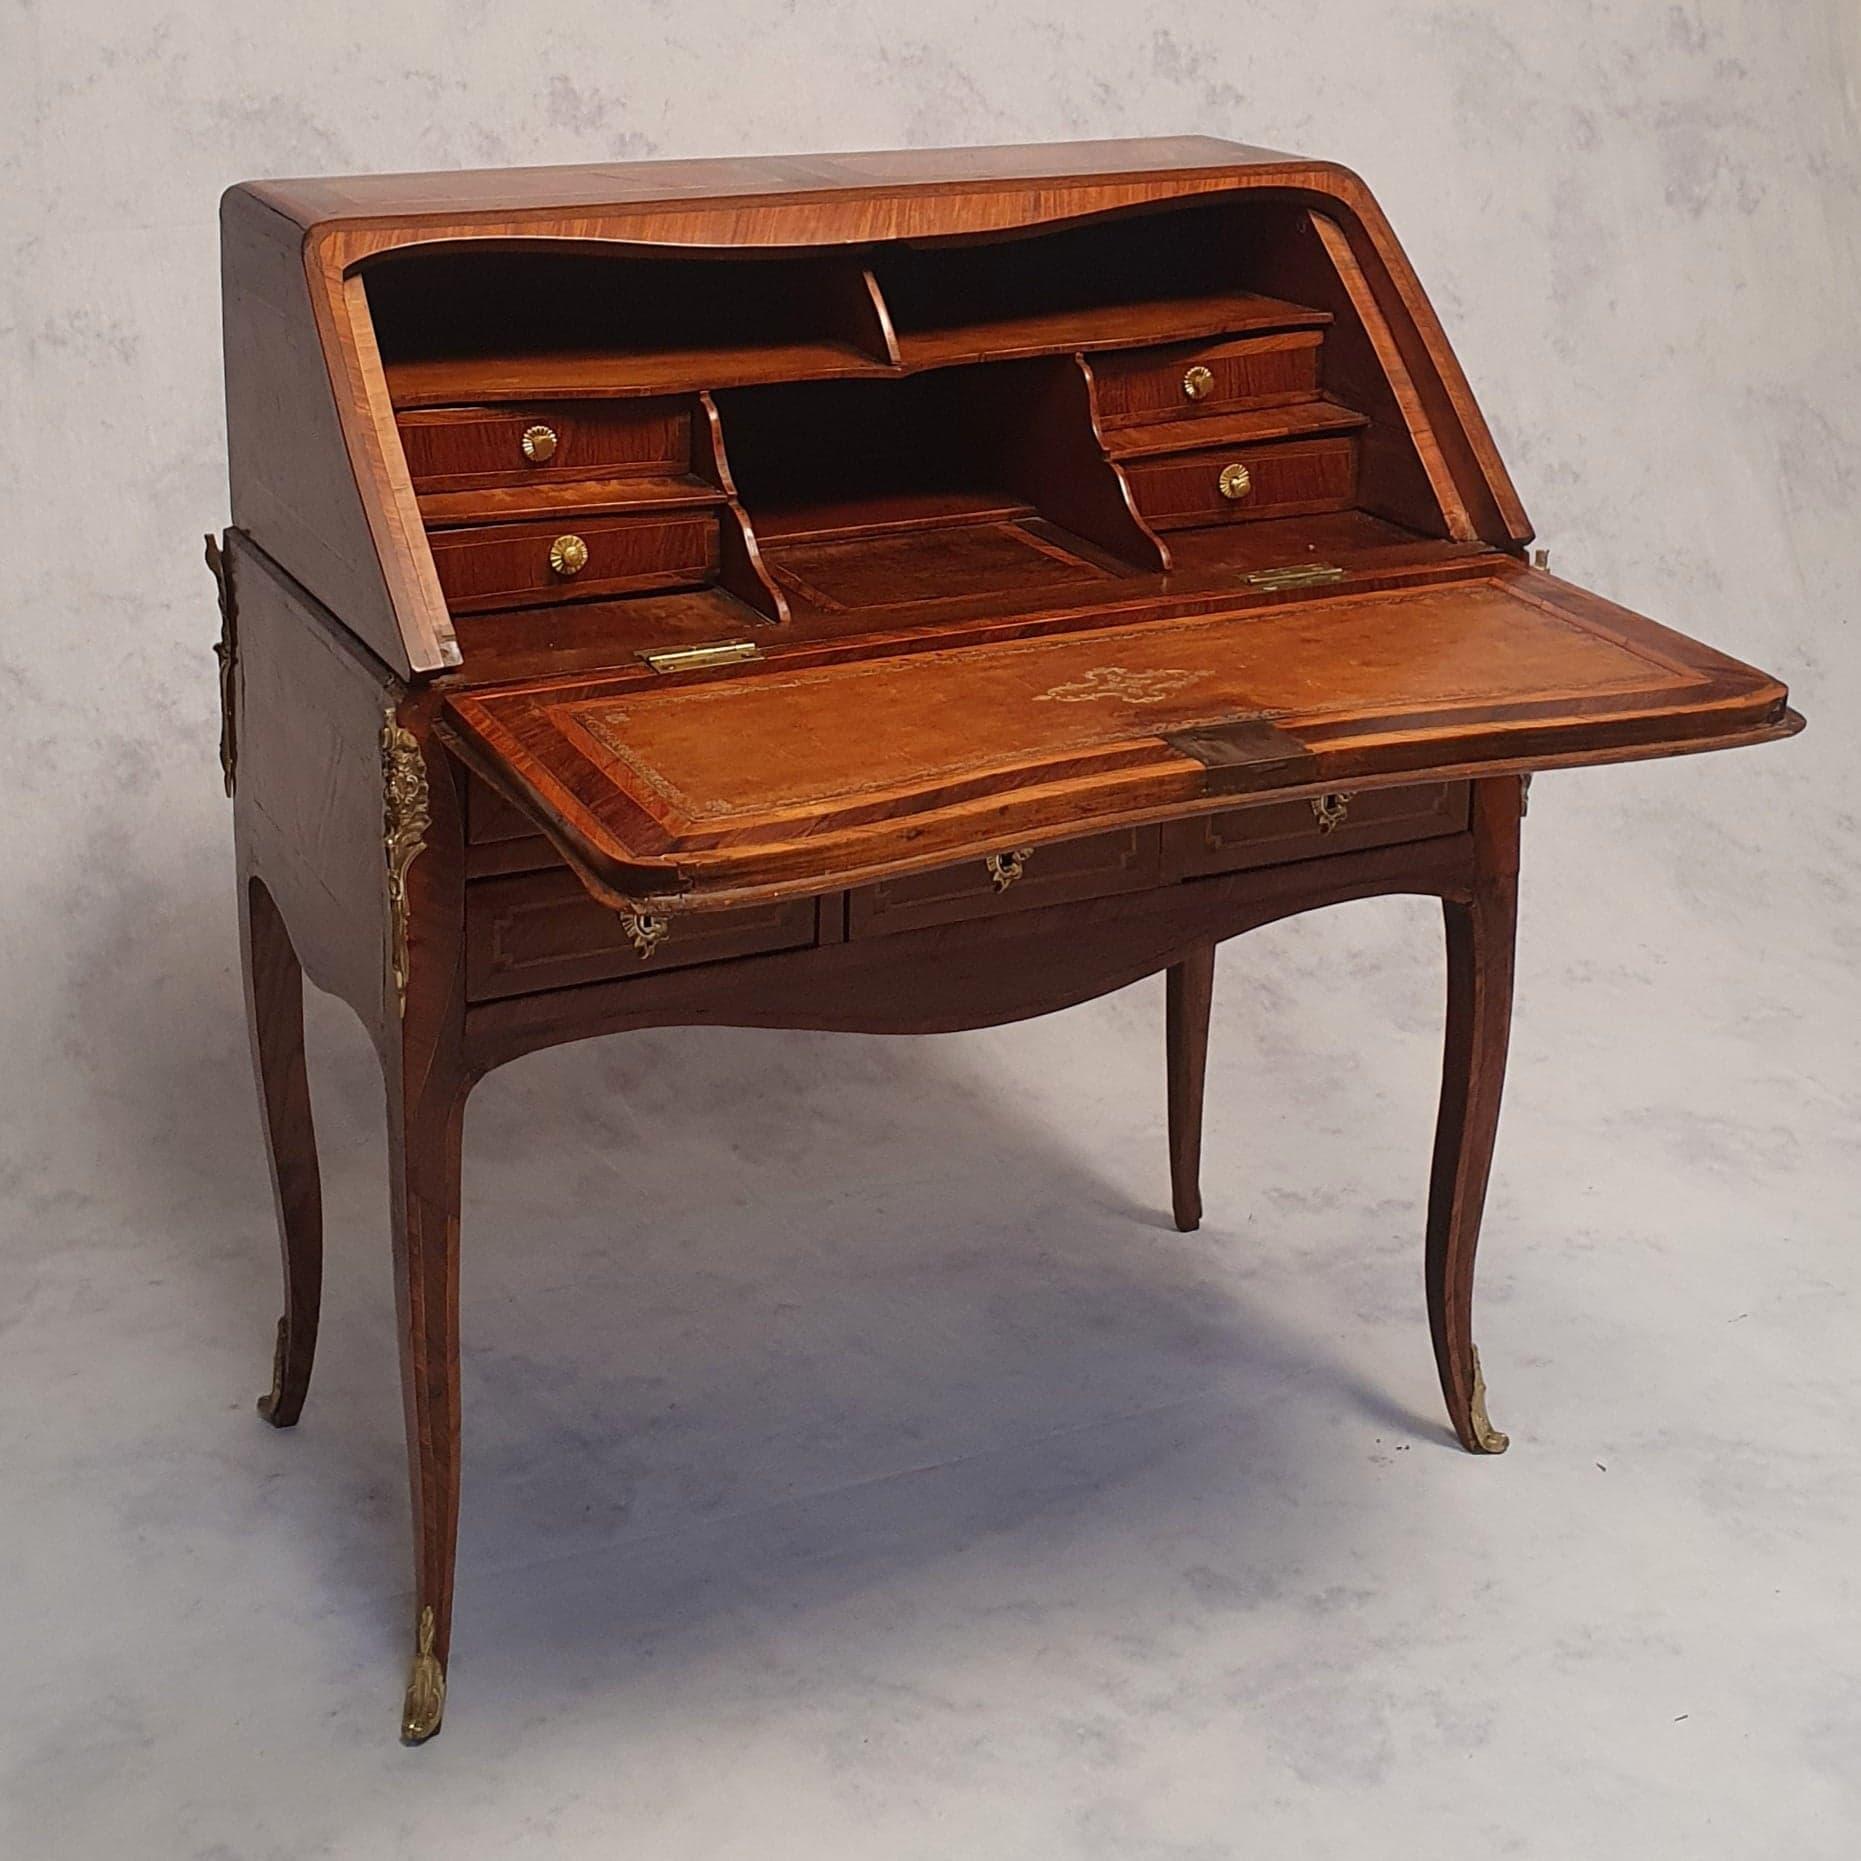 Sloping desk / sloping secretary / back donkey secretary from the Louis XV, Louis XVI transition period. Very high quality 18th century work. The subtly arched feet typical of the Louis XV style support a straighter body dressed in Greek specific to